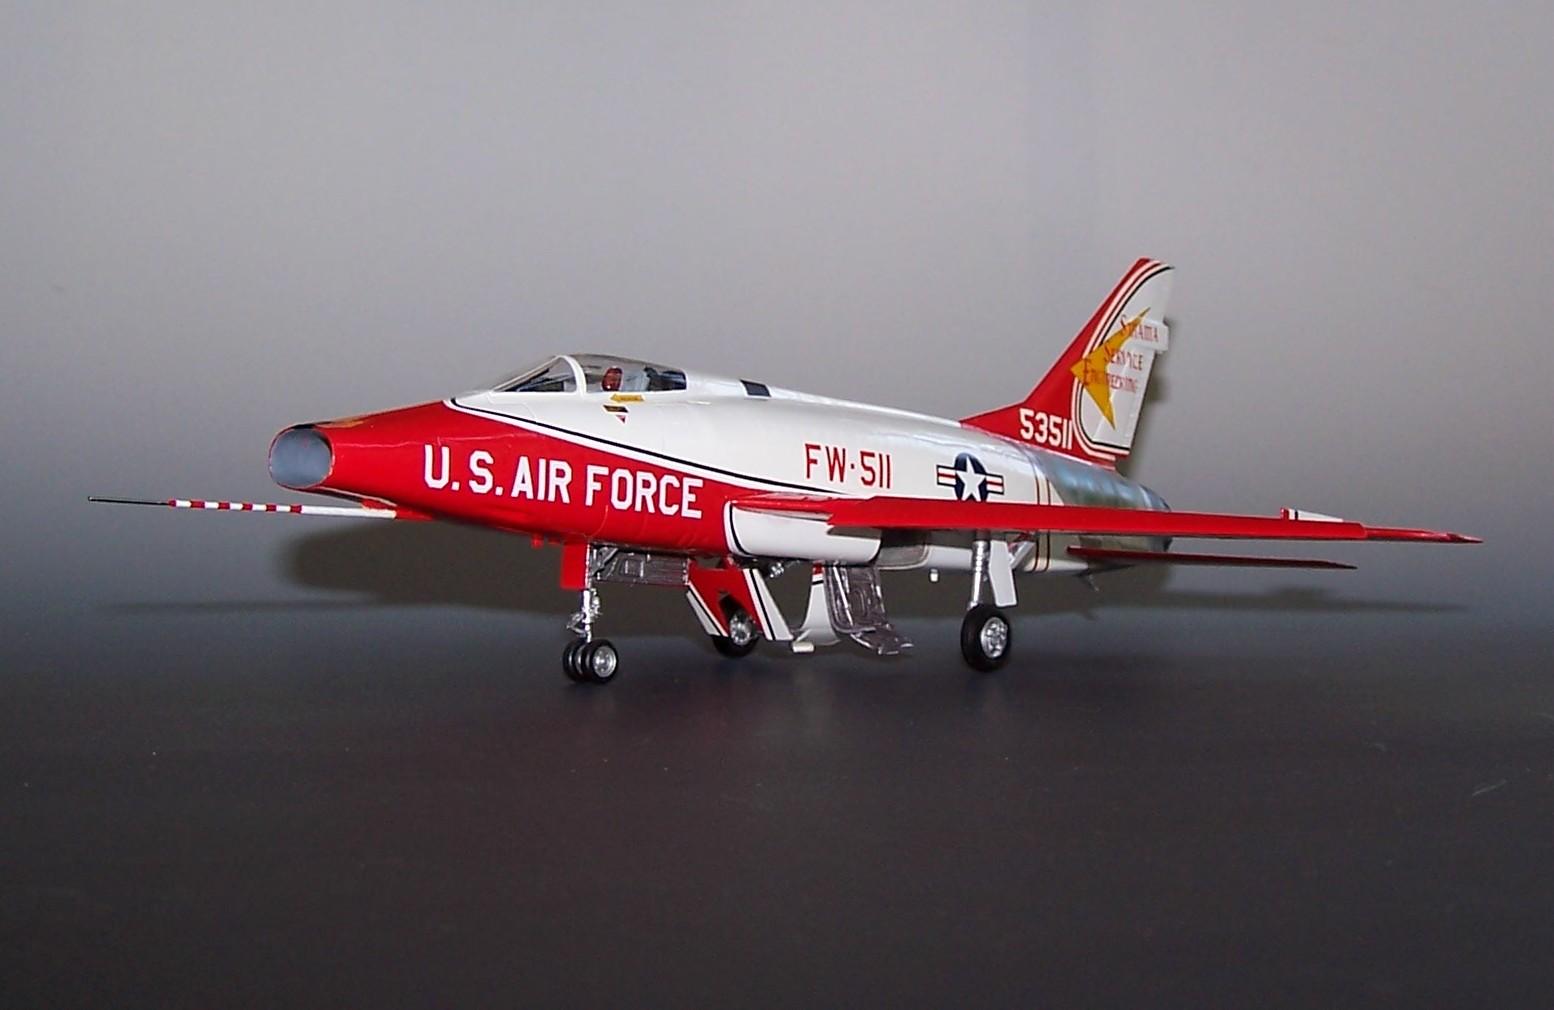 Photo of Super Sabre #55-3511 in SMAMA Colors. 
     Click on the picture to enlarge it.